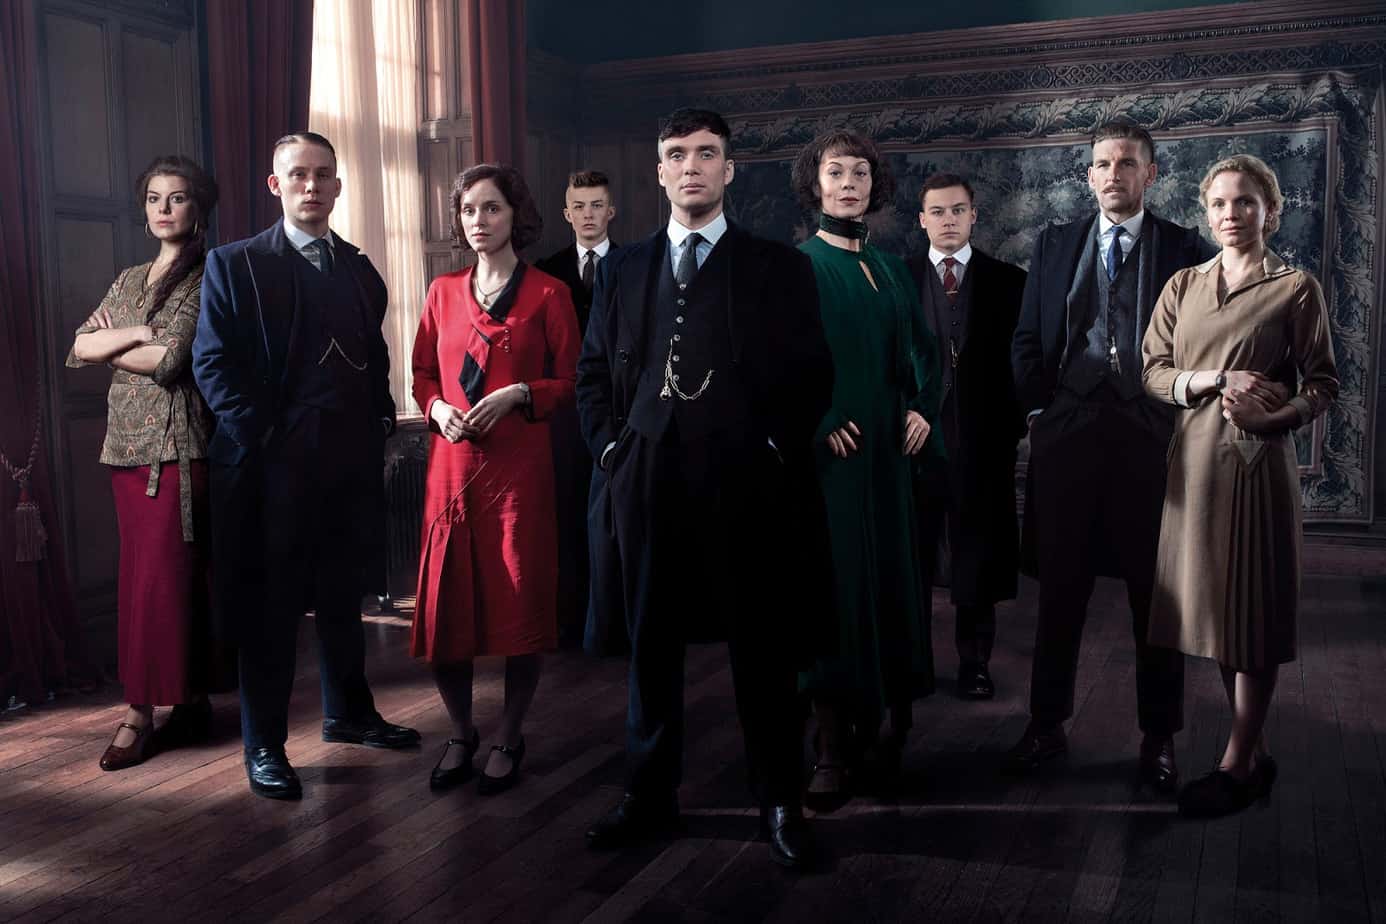 Cillian (middle) with the cast of Peaky Blinders (Source: The DreamCage)